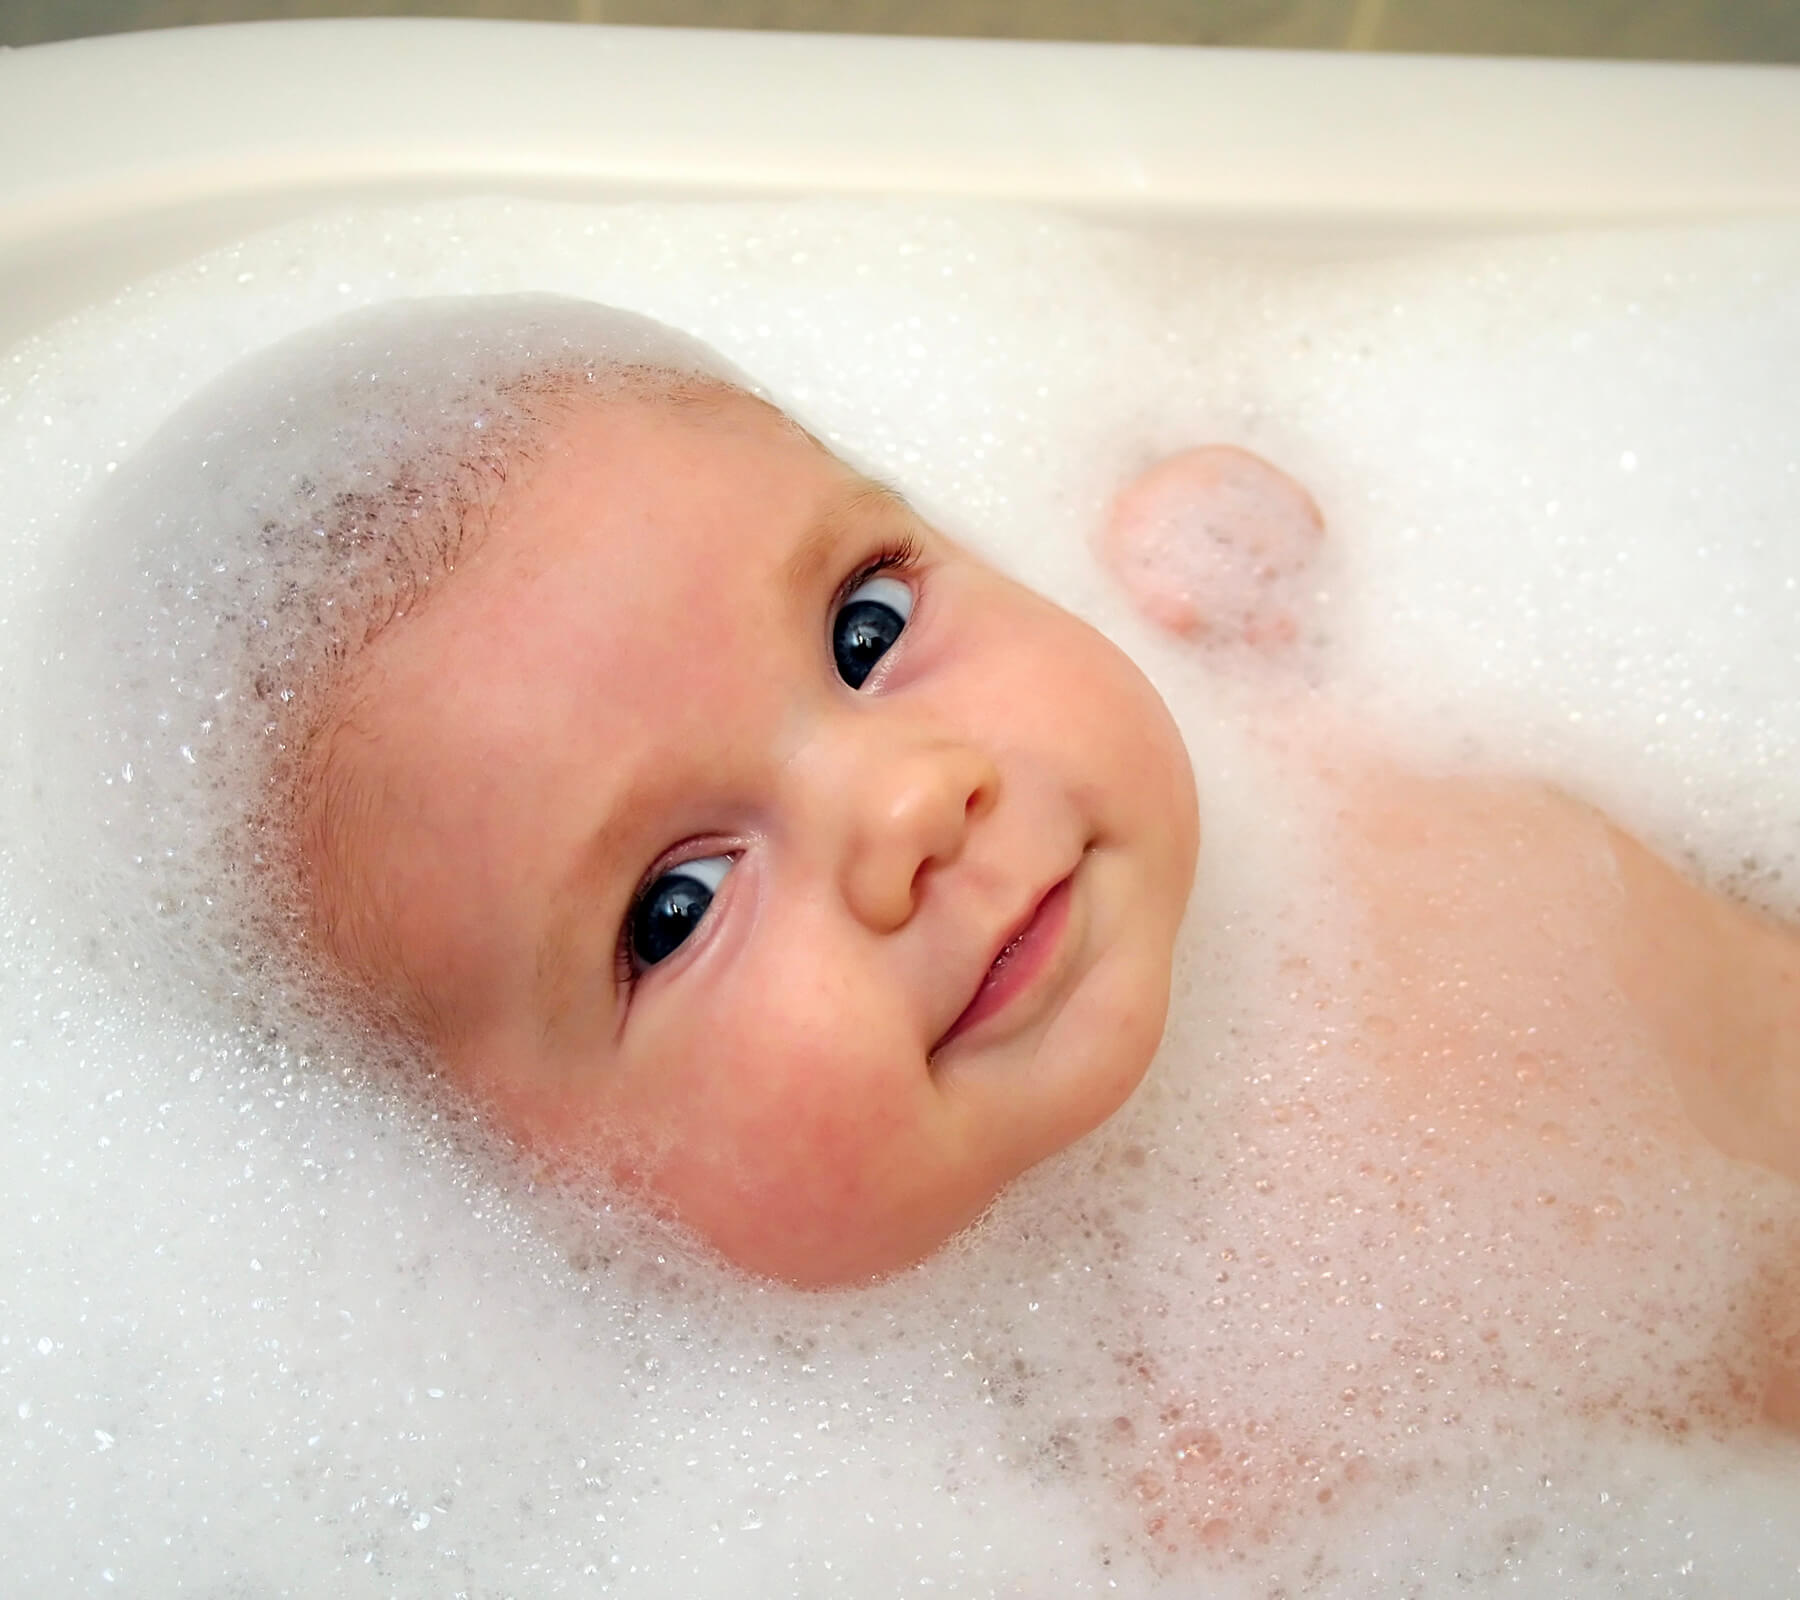 Making Bath Time More Enjoyable - 15 Tips - The Early Weeks